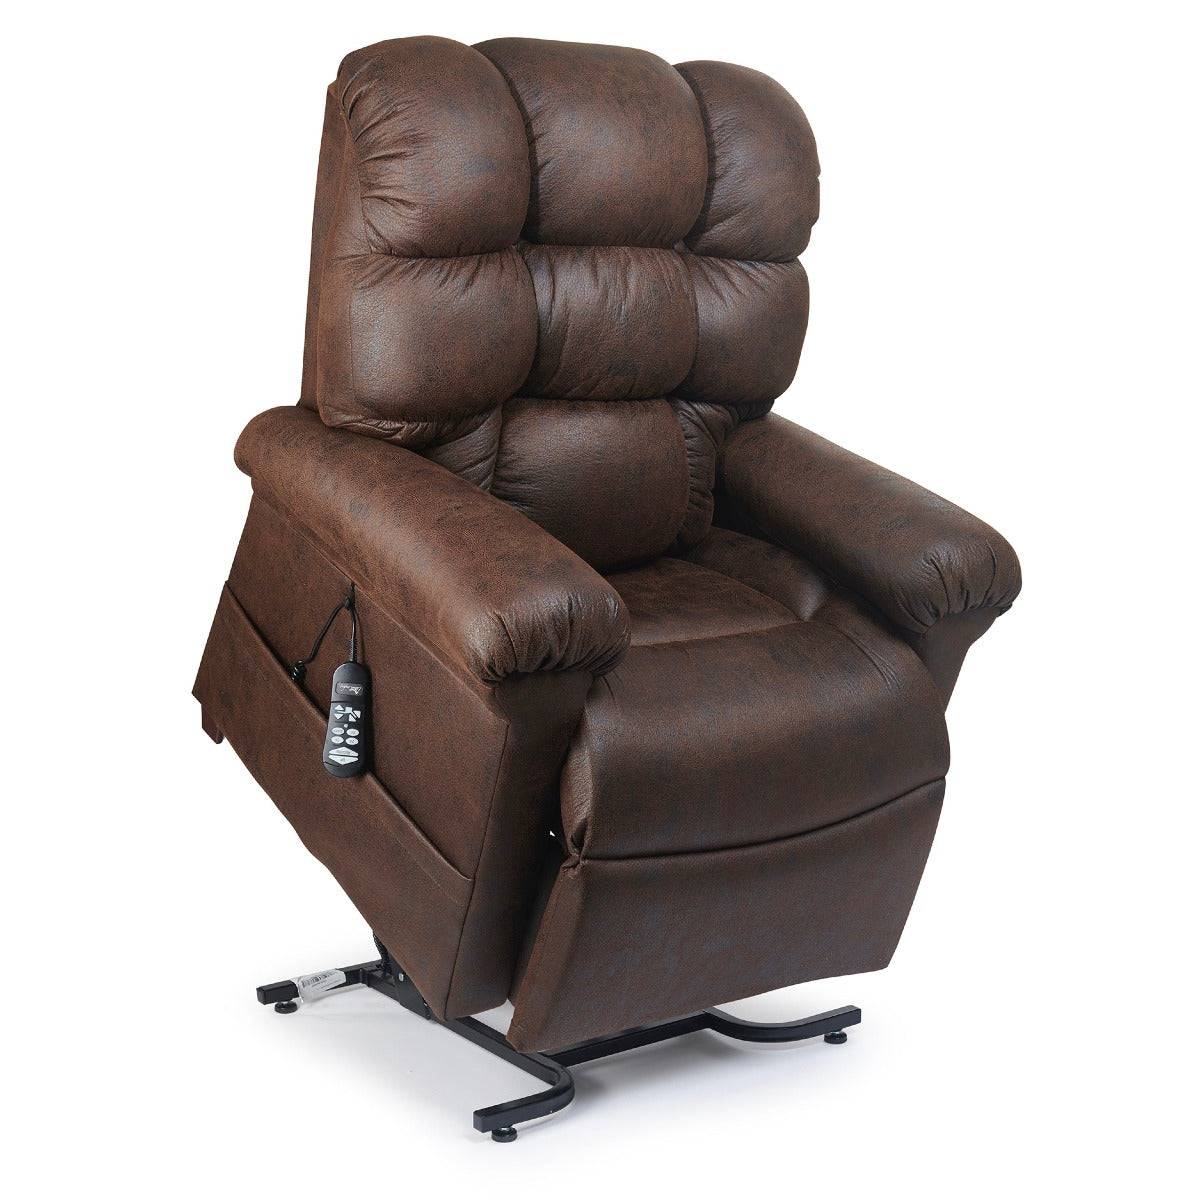 Vega Lift Chair Recliner, lifted angle